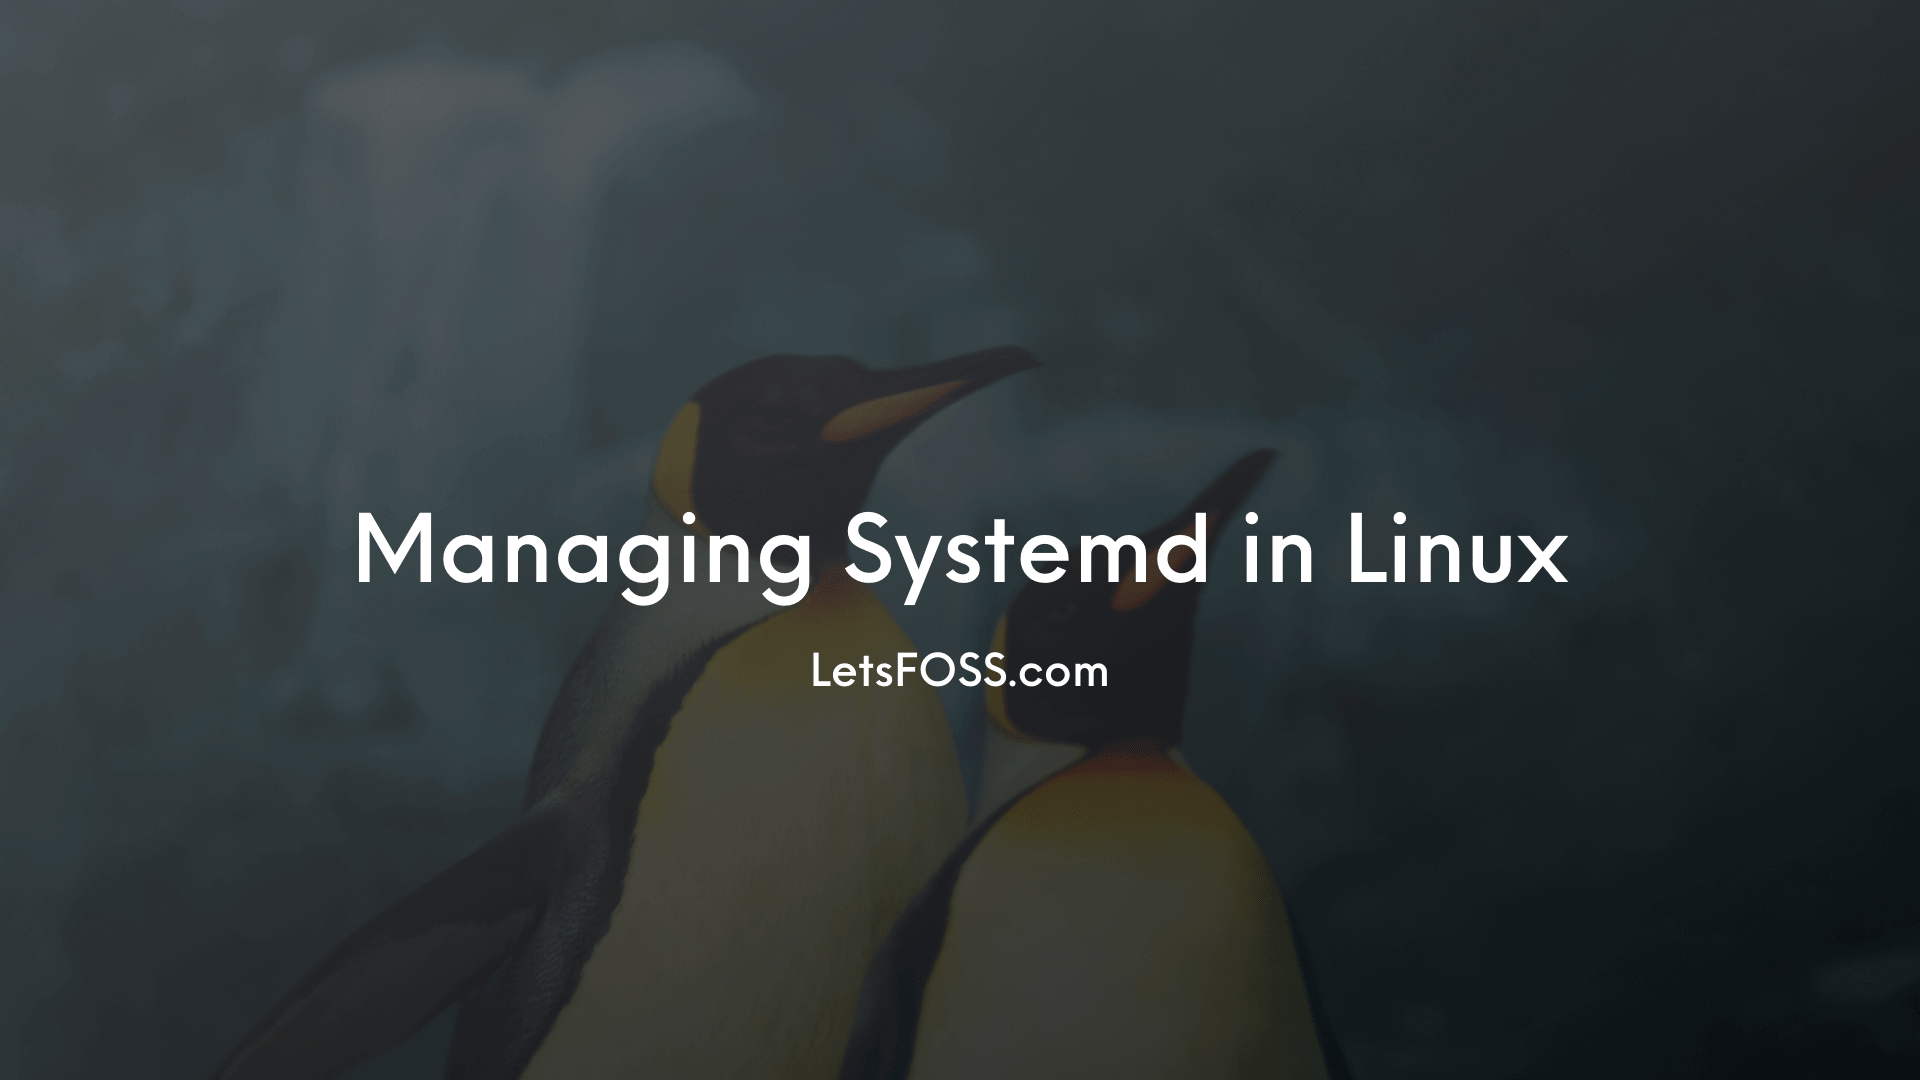 Managing Systemd in Linux